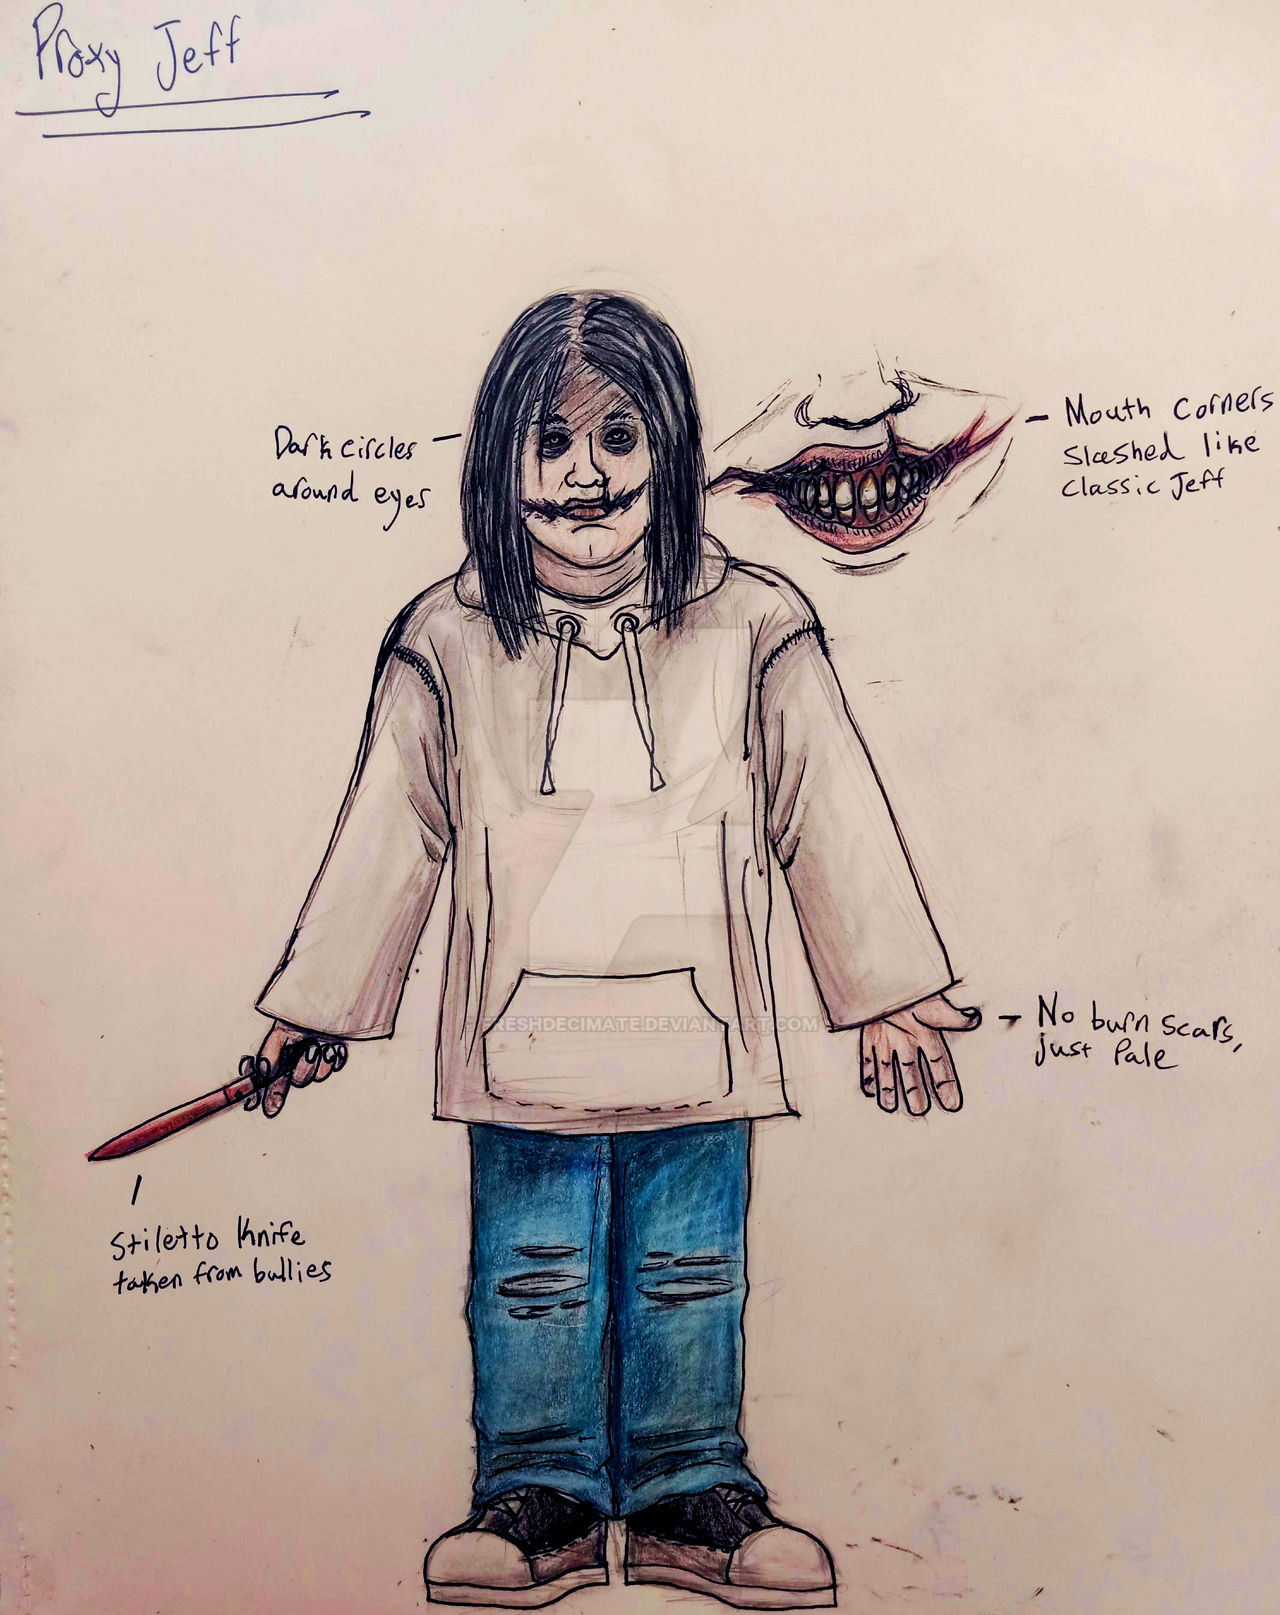 Where did the Jeff The Killer picture come from? #jeffthekiller